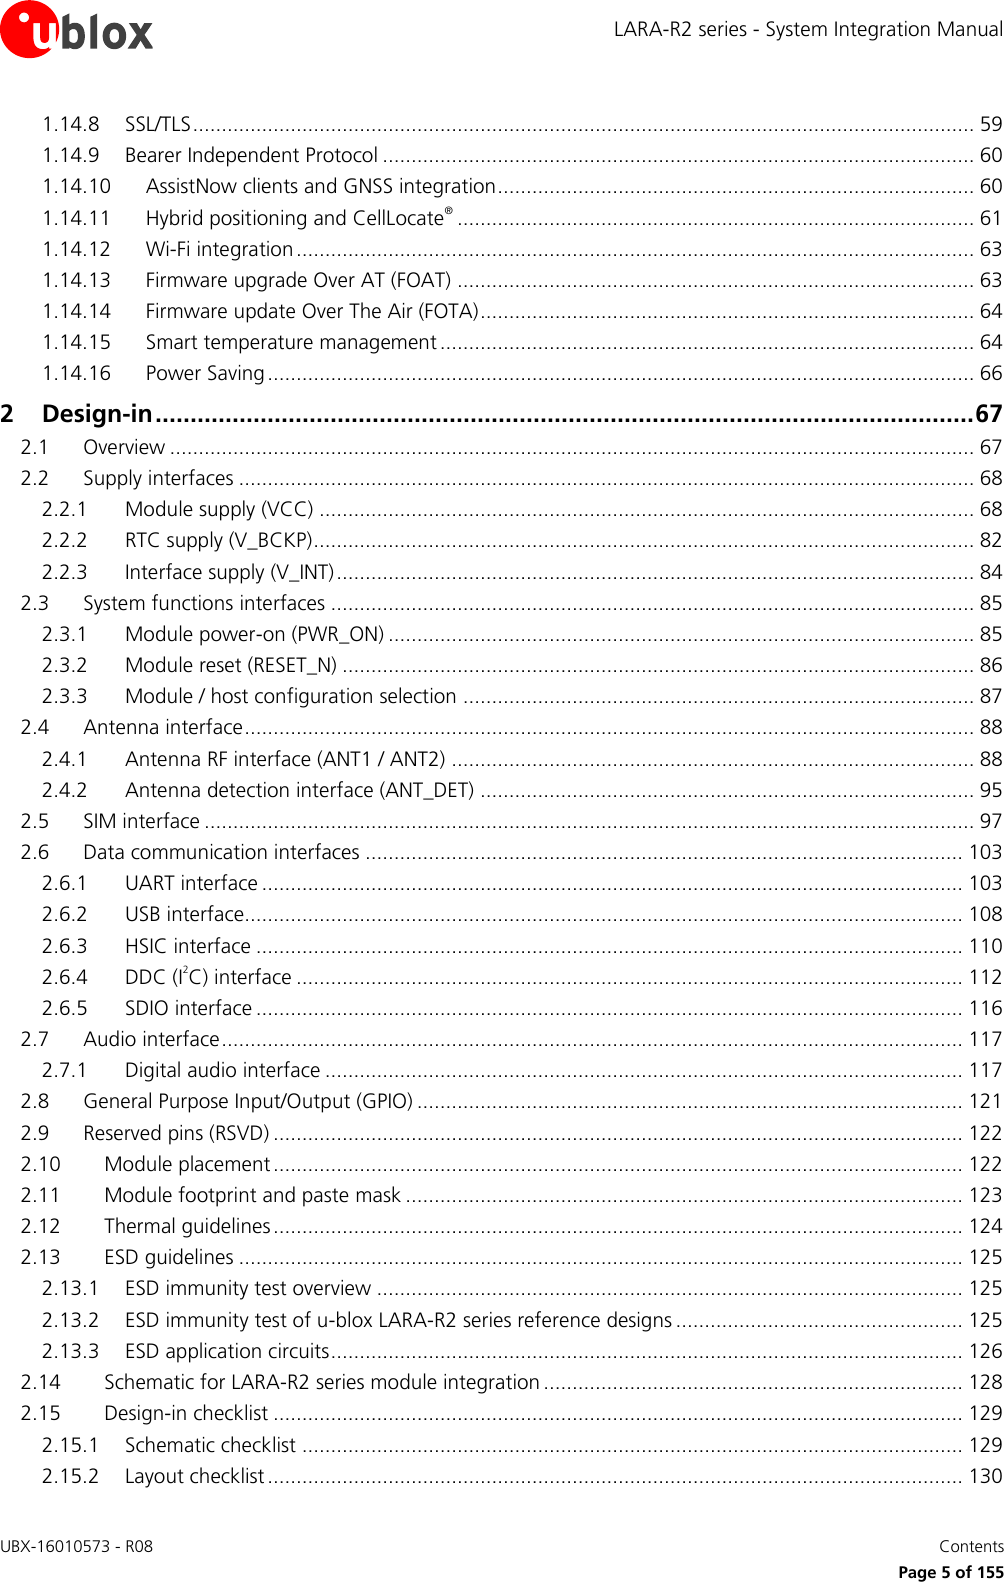 LARA-R2 series - System Integration Manual UBX-16010573 - R08    Contents     Page 5 of 155 1.14.8 SSL/TLS ........................................................................................................................................ 59 1.14.9 Bearer Independent Protocol ....................................................................................................... 60 1.14.10 AssistNow clients and GNSS integration ................................................................................... 60 1.14.11 Hybrid positioning and CellLocate® .......................................................................................... 61 1.14.12 Wi-Fi integration ...................................................................................................................... 63 1.14.13 Firmware upgrade Over AT (FOAT) .......................................................................................... 63 1.14.14 Firmware update Over The Air (FOTA) ...................................................................................... 64 1.14.15 Smart temperature management ............................................................................................. 64 1.14.16 Power Saving ........................................................................................................................... 66 2 Design-in ..................................................................................................................... 67 2.1 Overview ............................................................................................................................................ 67 2.2 Supply interfaces ................................................................................................................................ 68 2.2.1 Module supply (VCC) .................................................................................................................. 68 2.2.2 RTC supply (V_BCKP) ................................................................................................................... 82 2.2.3 Interface supply (V_INT) ............................................................................................................... 84 2.3 System functions interfaces ................................................................................................................ 85 2.3.1 Module power-on (PWR_ON) ...................................................................................................... 85 2.3.2 Module reset (RESET_N) .............................................................................................................. 86 2.3.3 Module / host configuration selection ......................................................................................... 87 2.4 Antenna interface ............................................................................................................................... 88 2.4.1 Antenna RF interface (ANT1 / ANT2) ........................................................................................... 88 2.4.2 Antenna detection interface (ANT_DET) ...................................................................................... 95 2.5 SIM interface ...................................................................................................................................... 97 2.6 Data communication interfaces ........................................................................................................ 103 2.6.1 UART interface .......................................................................................................................... 103 2.6.2 USB interface............................................................................................................................. 108 2.6.3 HSIC interface ........................................................................................................................... 110 2.6.4 DDC (I2C) interface .................................................................................................................... 112 2.6.5 SDIO interface ........................................................................................................................... 116 2.7 Audio interface ................................................................................................................................. 117 2.7.1 Digital audio interface ............................................................................................................... 117 2.8 General Purpose Input/Output (GPIO) ............................................................................................... 121 2.9 Reserved pins (RSVD) ........................................................................................................................ 122 2.10 Module placement ........................................................................................................................ 122 2.11 Module footprint and paste mask ................................................................................................. 123 2.12 Thermal guidelines ........................................................................................................................ 124 2.13 ESD guidelines .............................................................................................................................. 125 2.13.1 ESD immunity test overview ...................................................................................................... 125 2.13.2 ESD immunity test of u-blox LARA-R2 series reference designs .................................................. 125 2.13.3 ESD application circuits .............................................................................................................. 126 2.14 Schematic for LARA-R2 series module integration ......................................................................... 128 2.15 Design-in checklist ........................................................................................................................ 129 2.15.1 Schematic checklist ................................................................................................................... 129 2.15.2 Layout checklist ......................................................................................................................... 130 